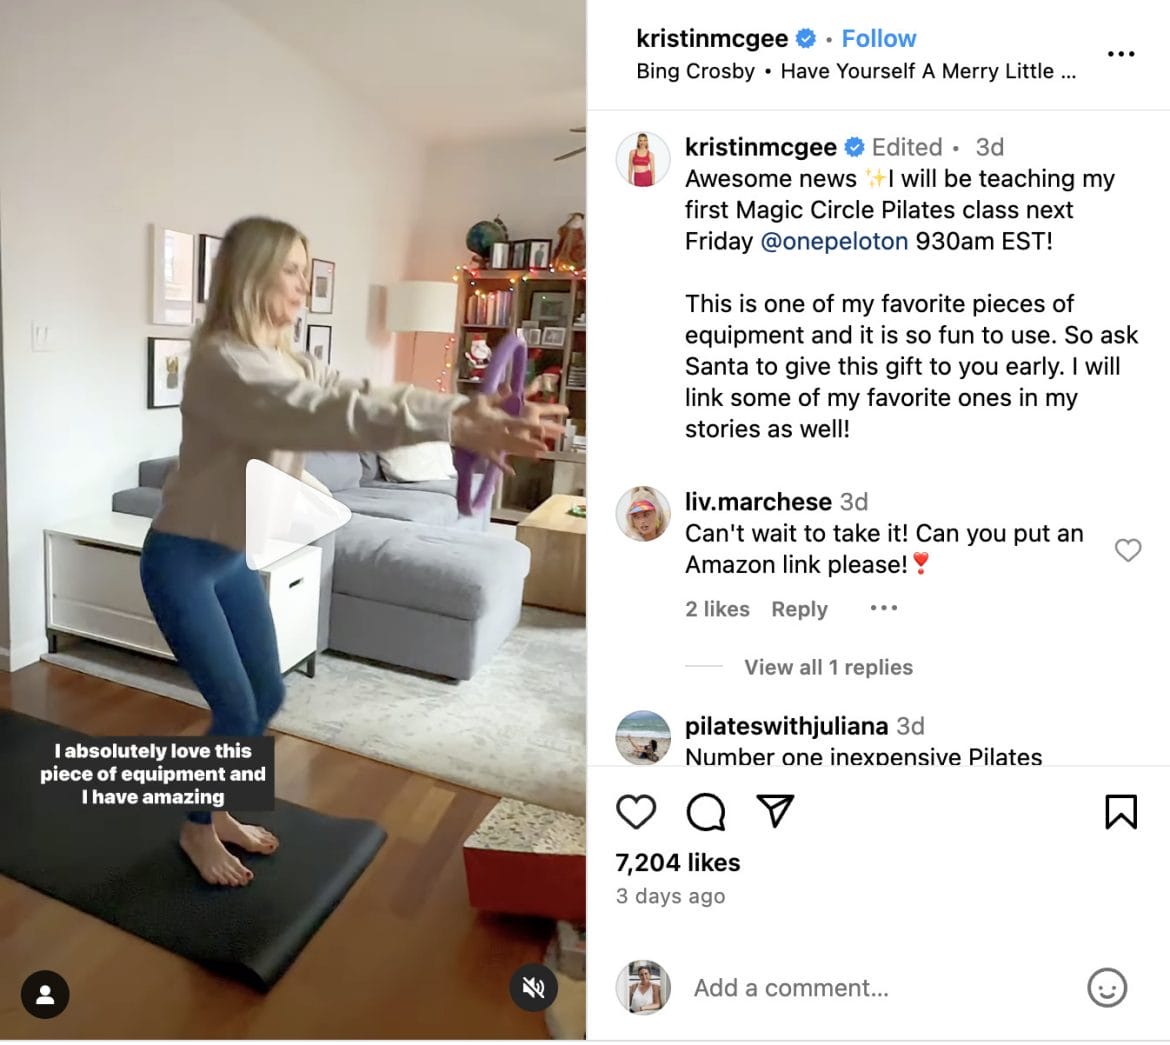 Kristin McGee's Instagram post about upcoming pilates class with a ring.